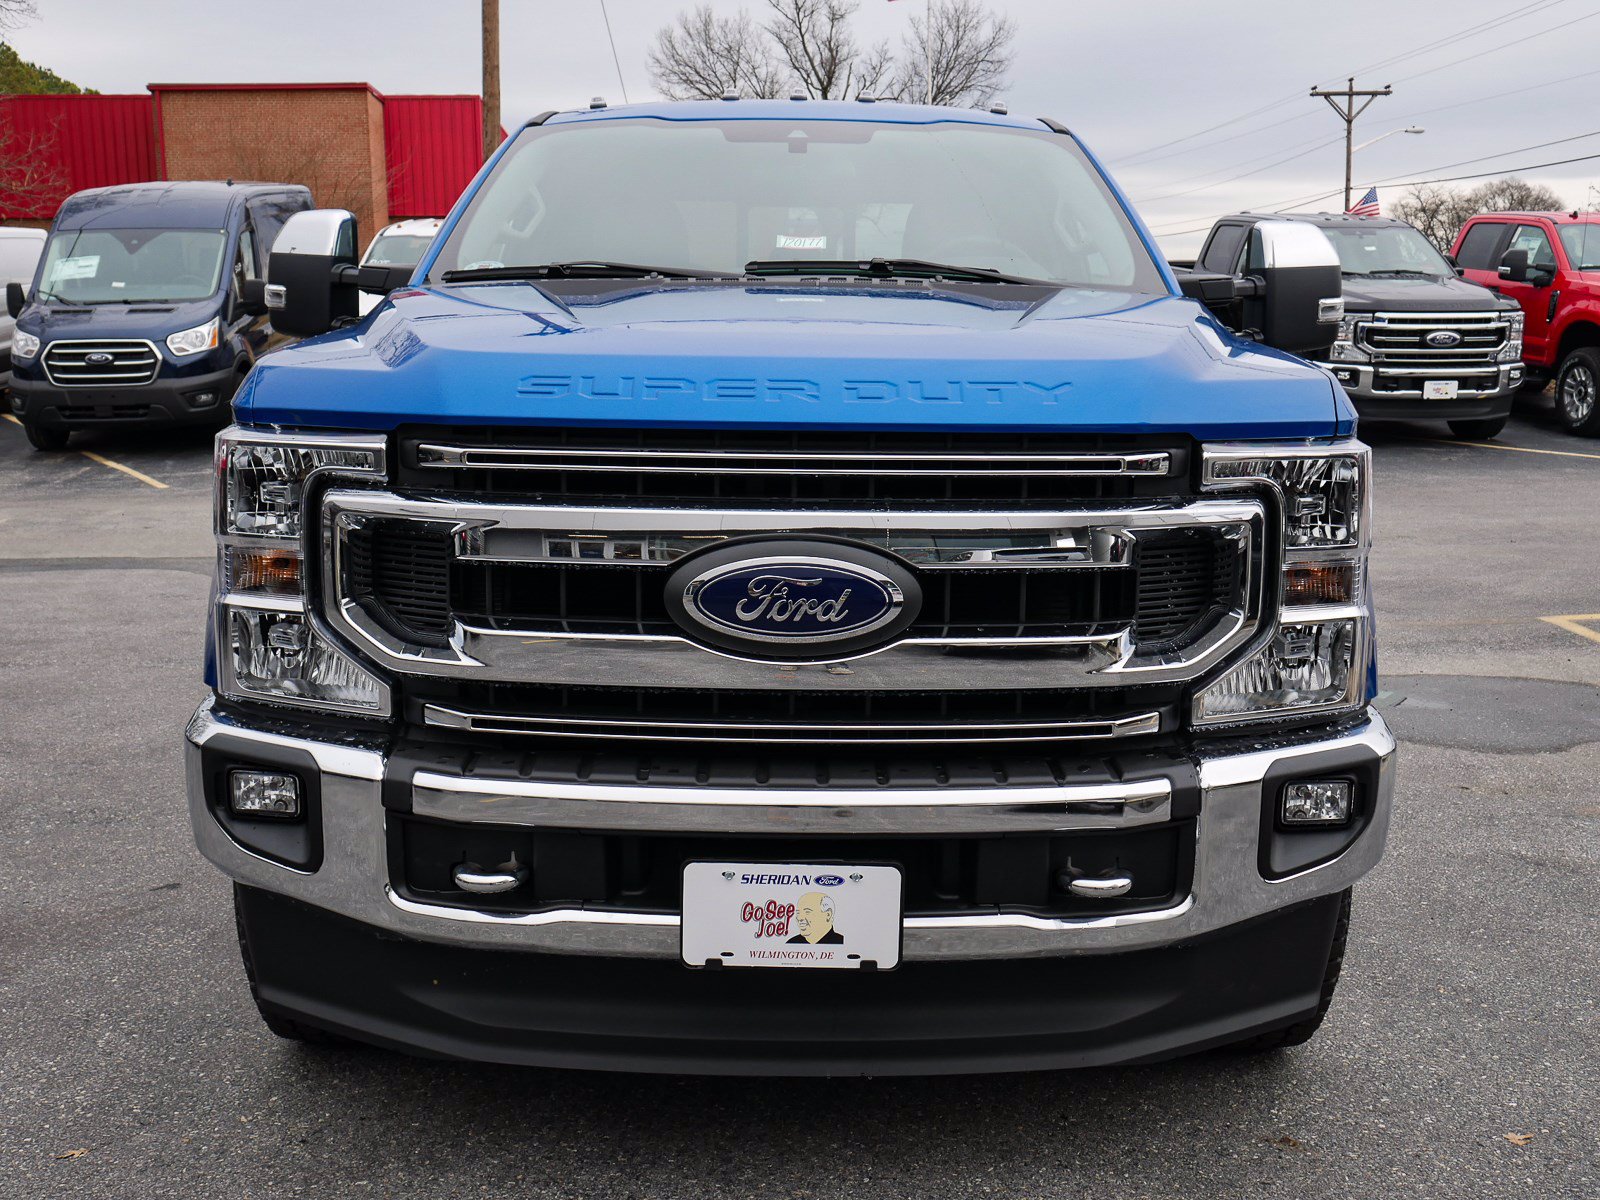 New 2020 Ford Super Duty F-350 SRW XLT Extended Cab Pickup in